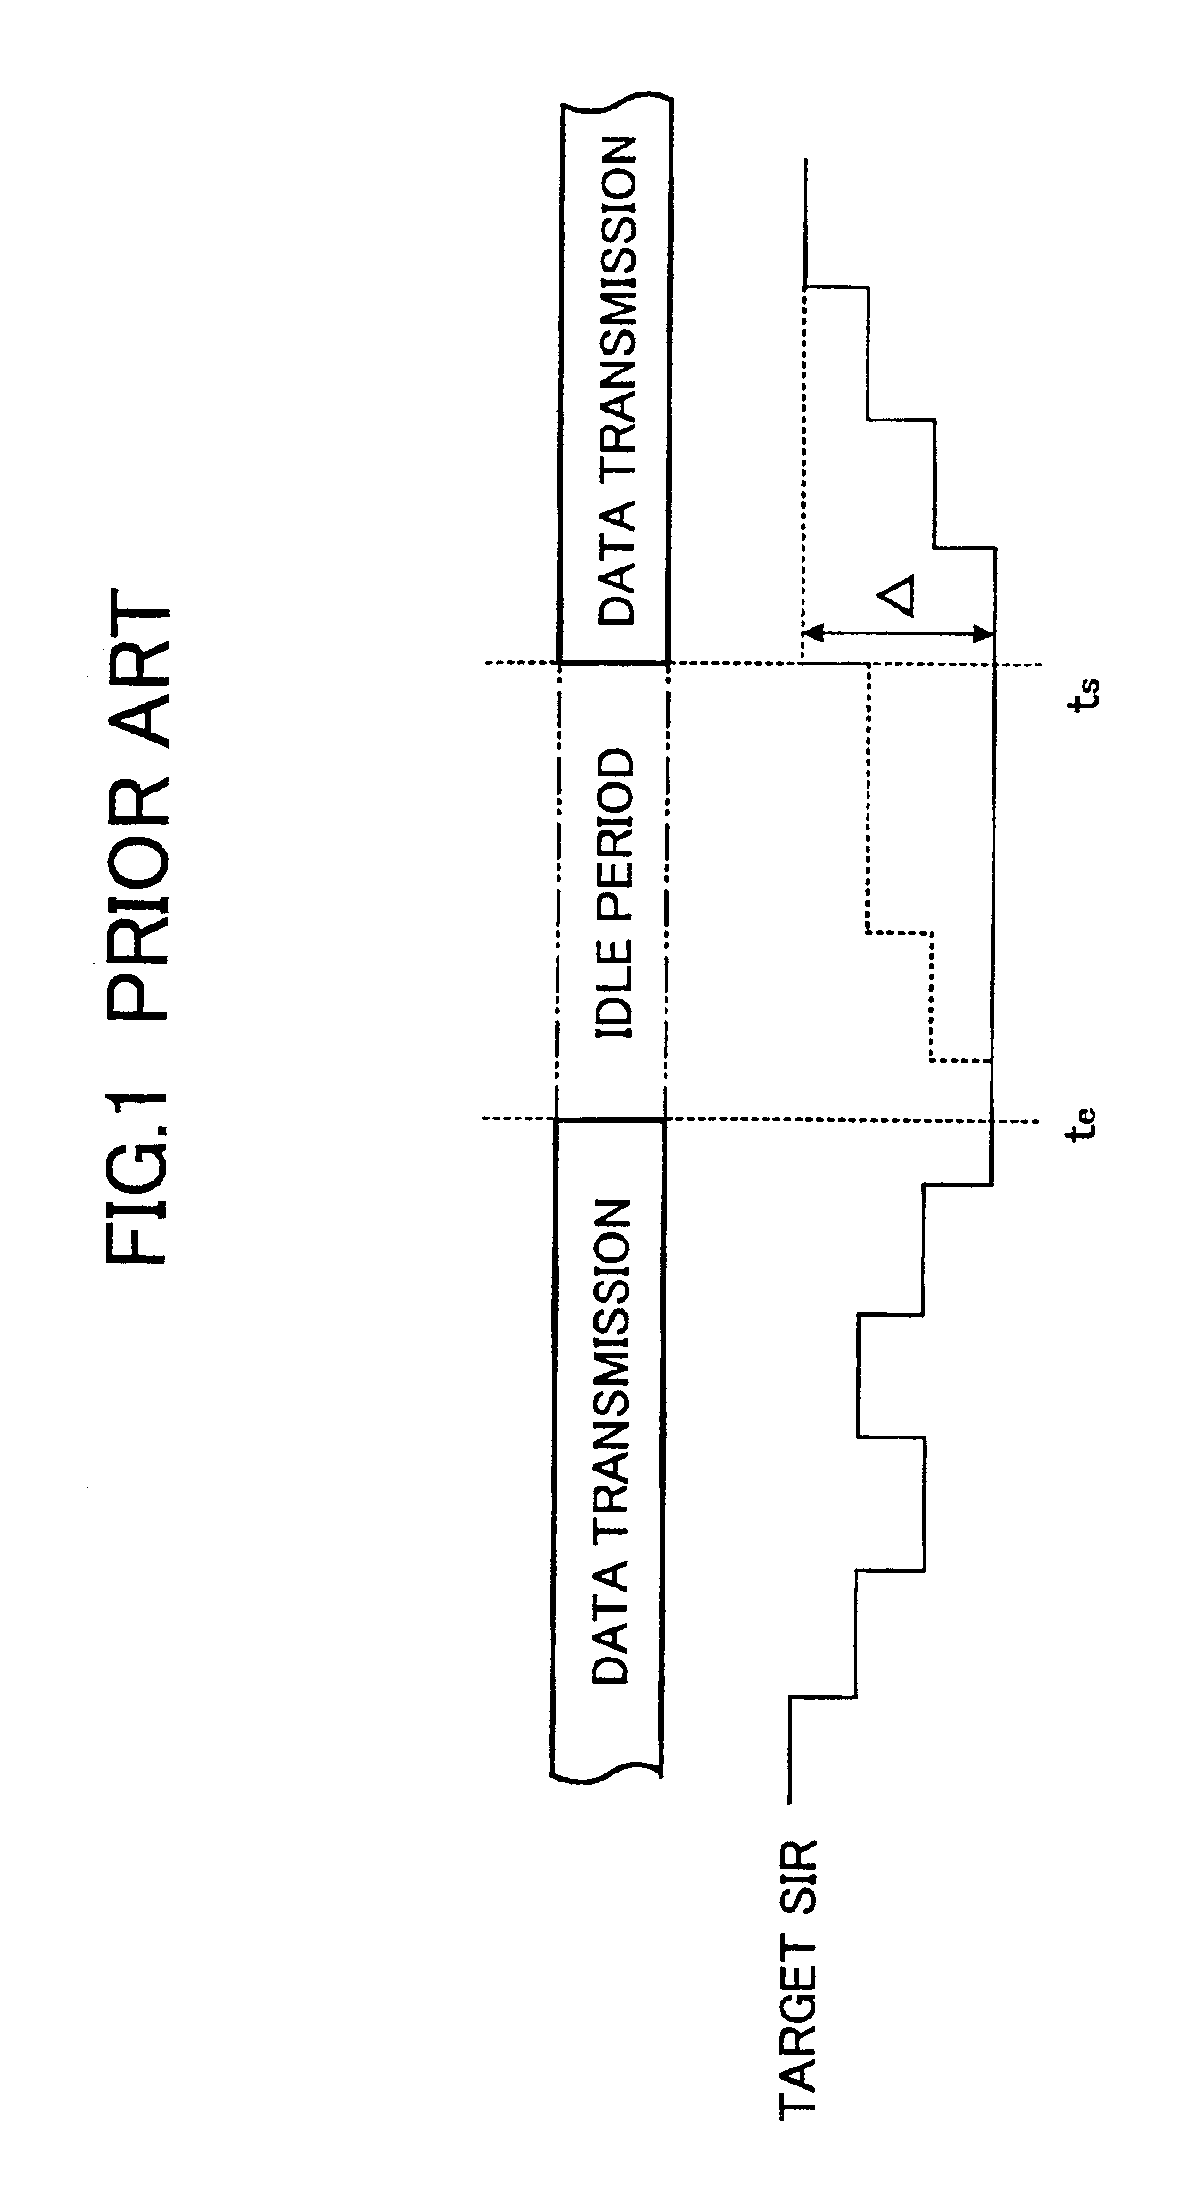 Transmit power control method and transmit power control system suitable to mobile communications